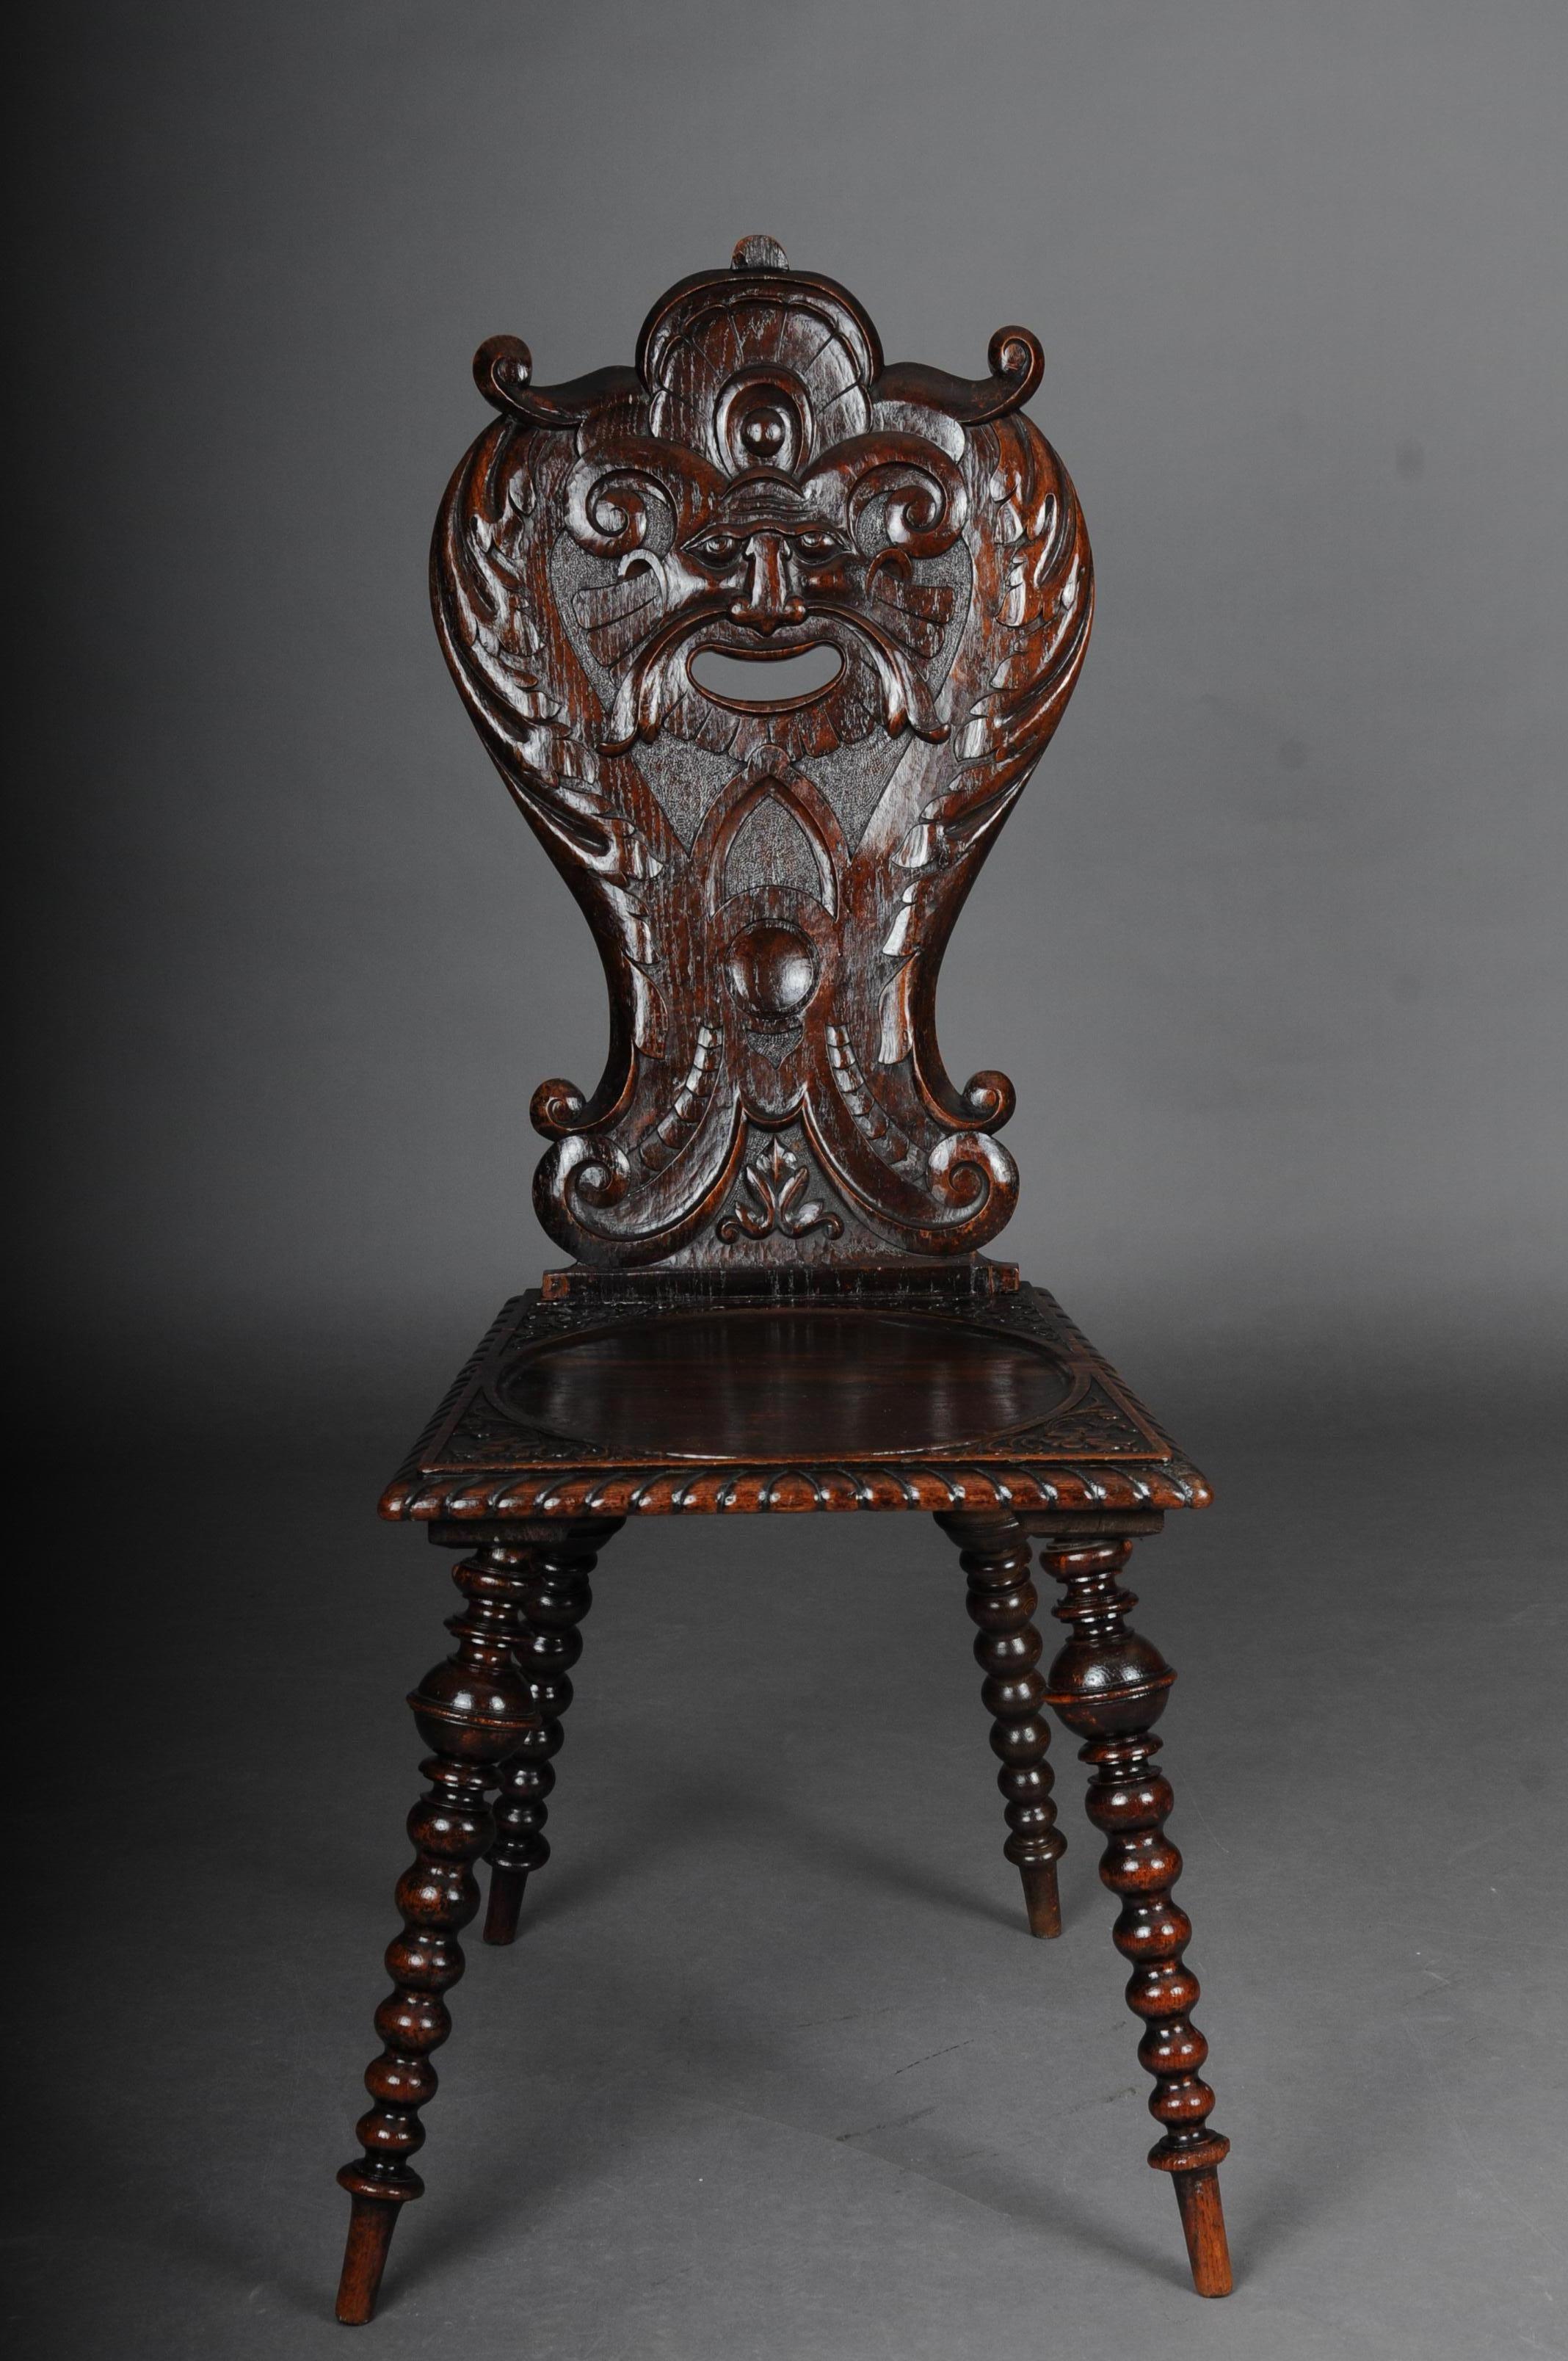 Antique Neo Renaissance board chair historicism circa 1870, oak B

Solid dark oak. Straight seat on turned and tapered legs.
Backrest with plastic carvings. Extremely decorative and rare historicism chairs with rich carving

(C-155).